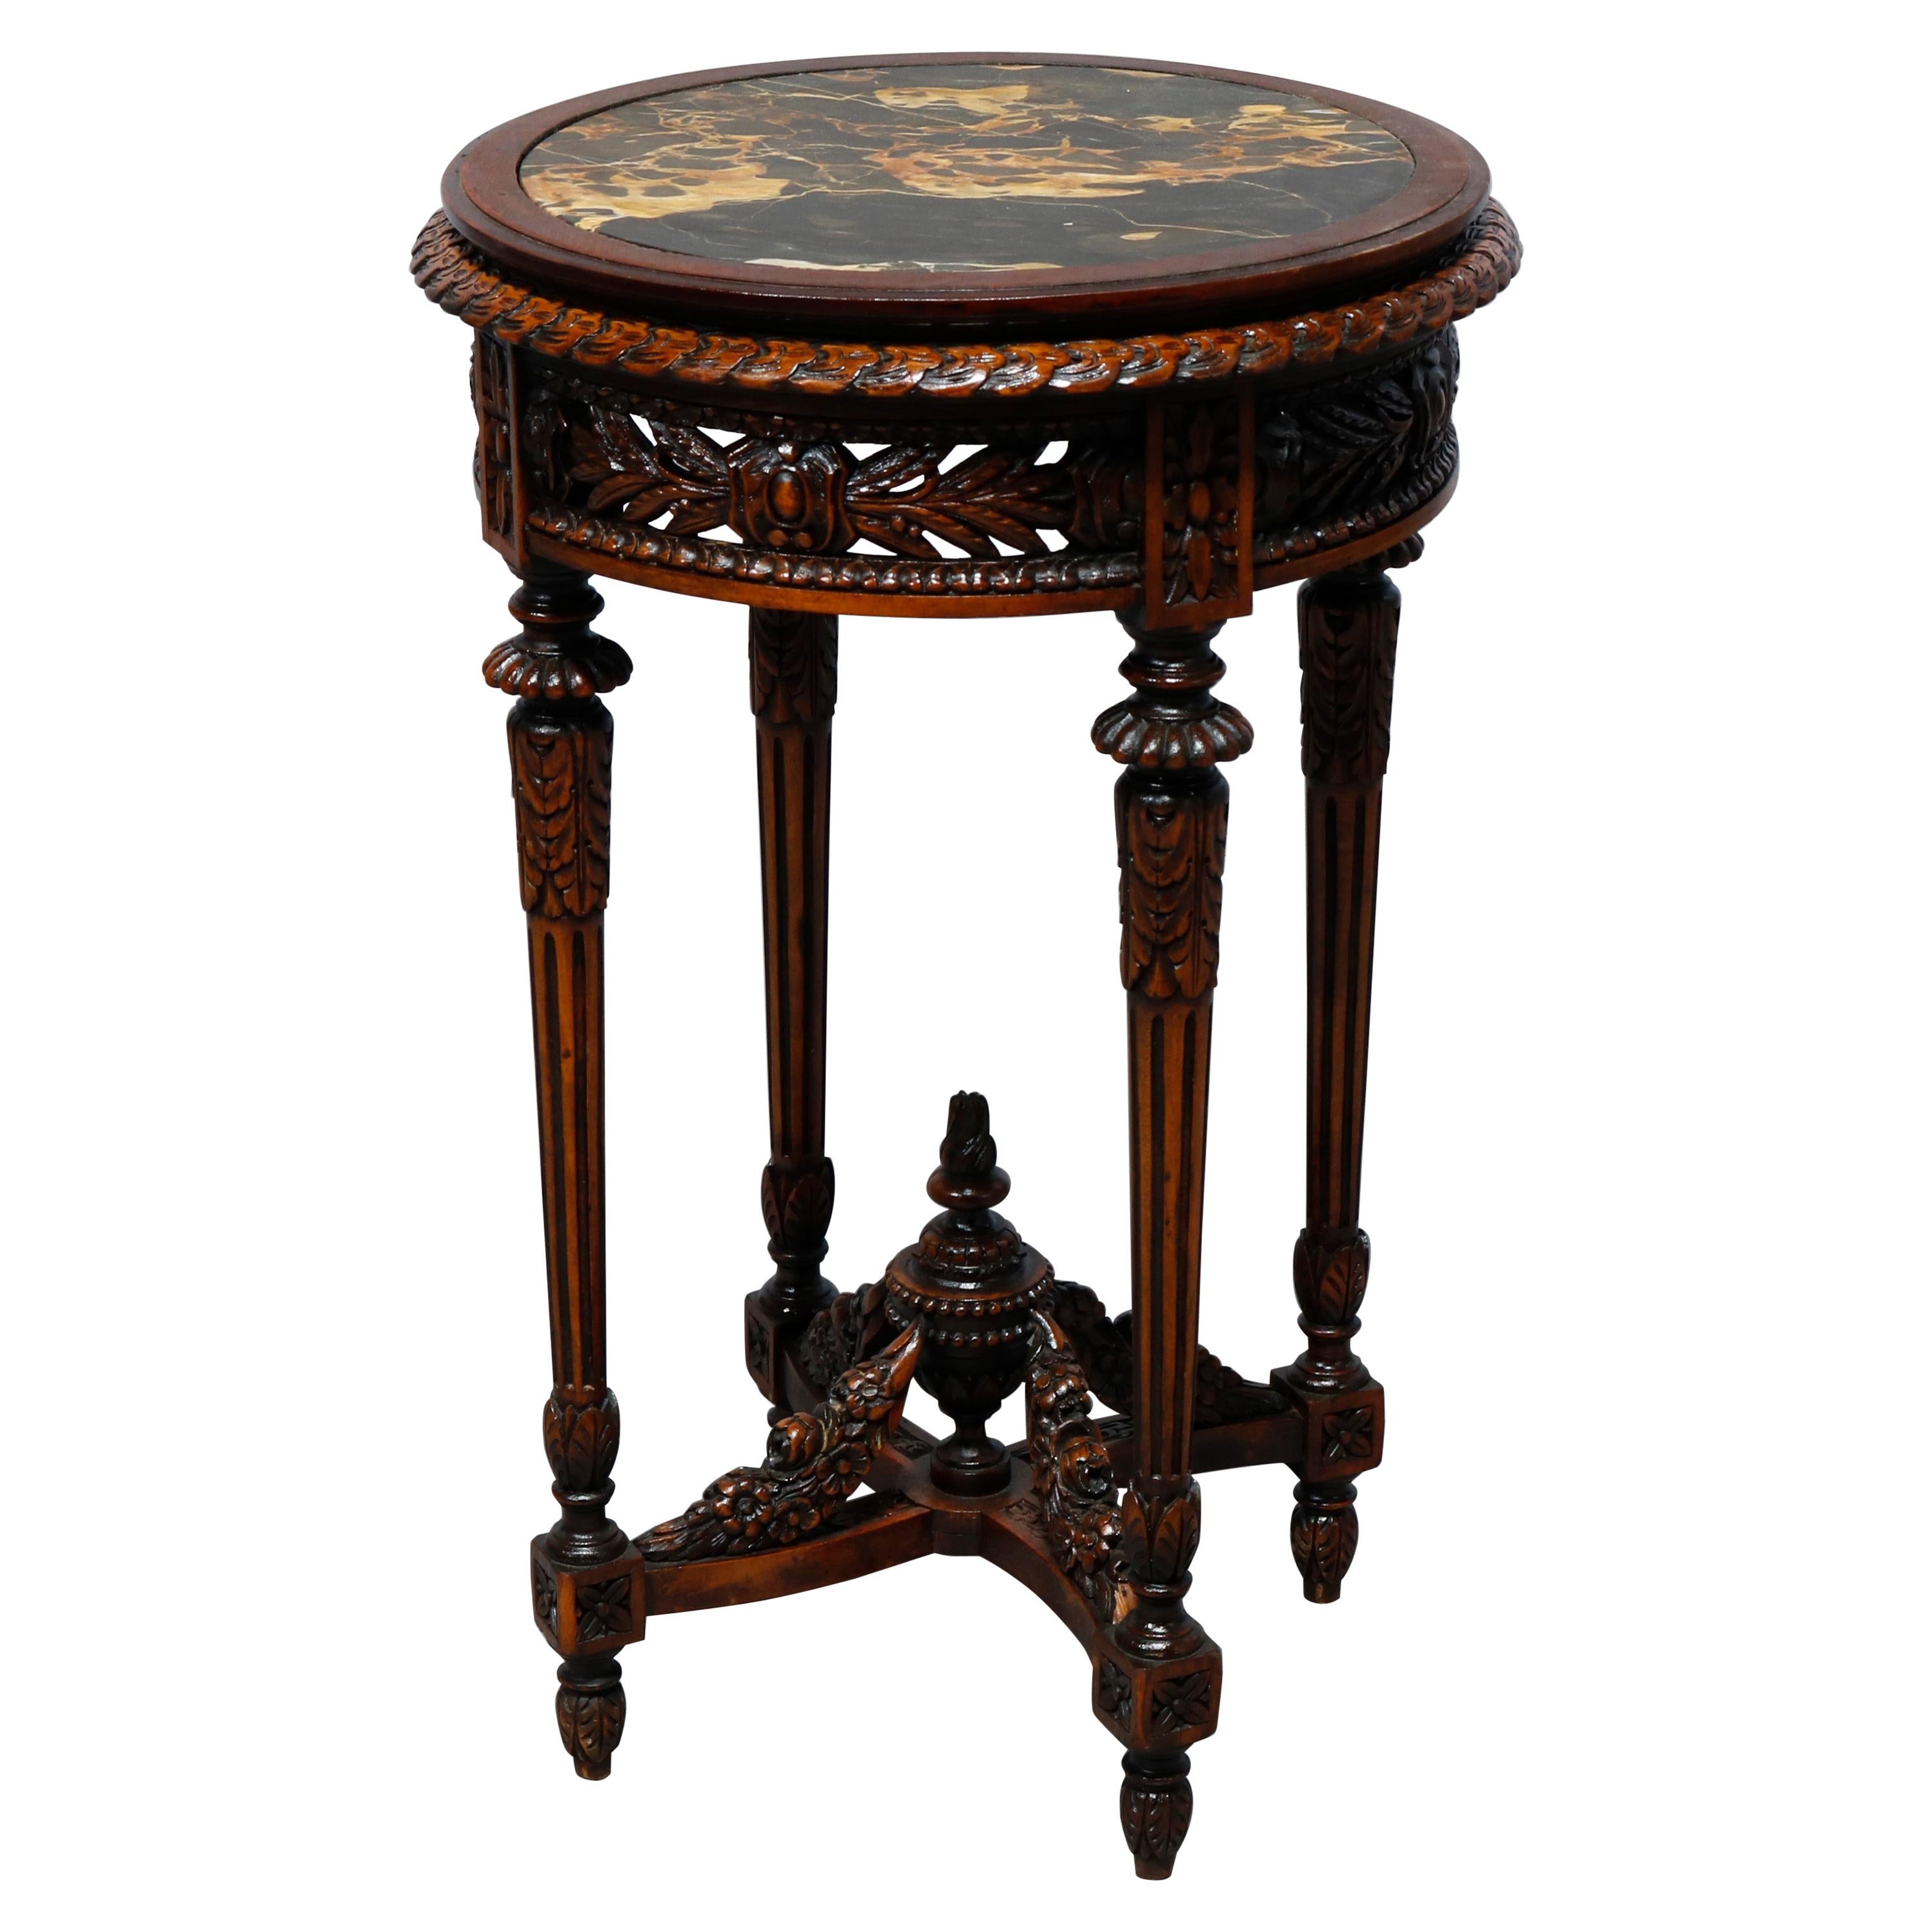 Antique Louis XVI Style Belgian Marble-Top Drink Stand, Circa 1900